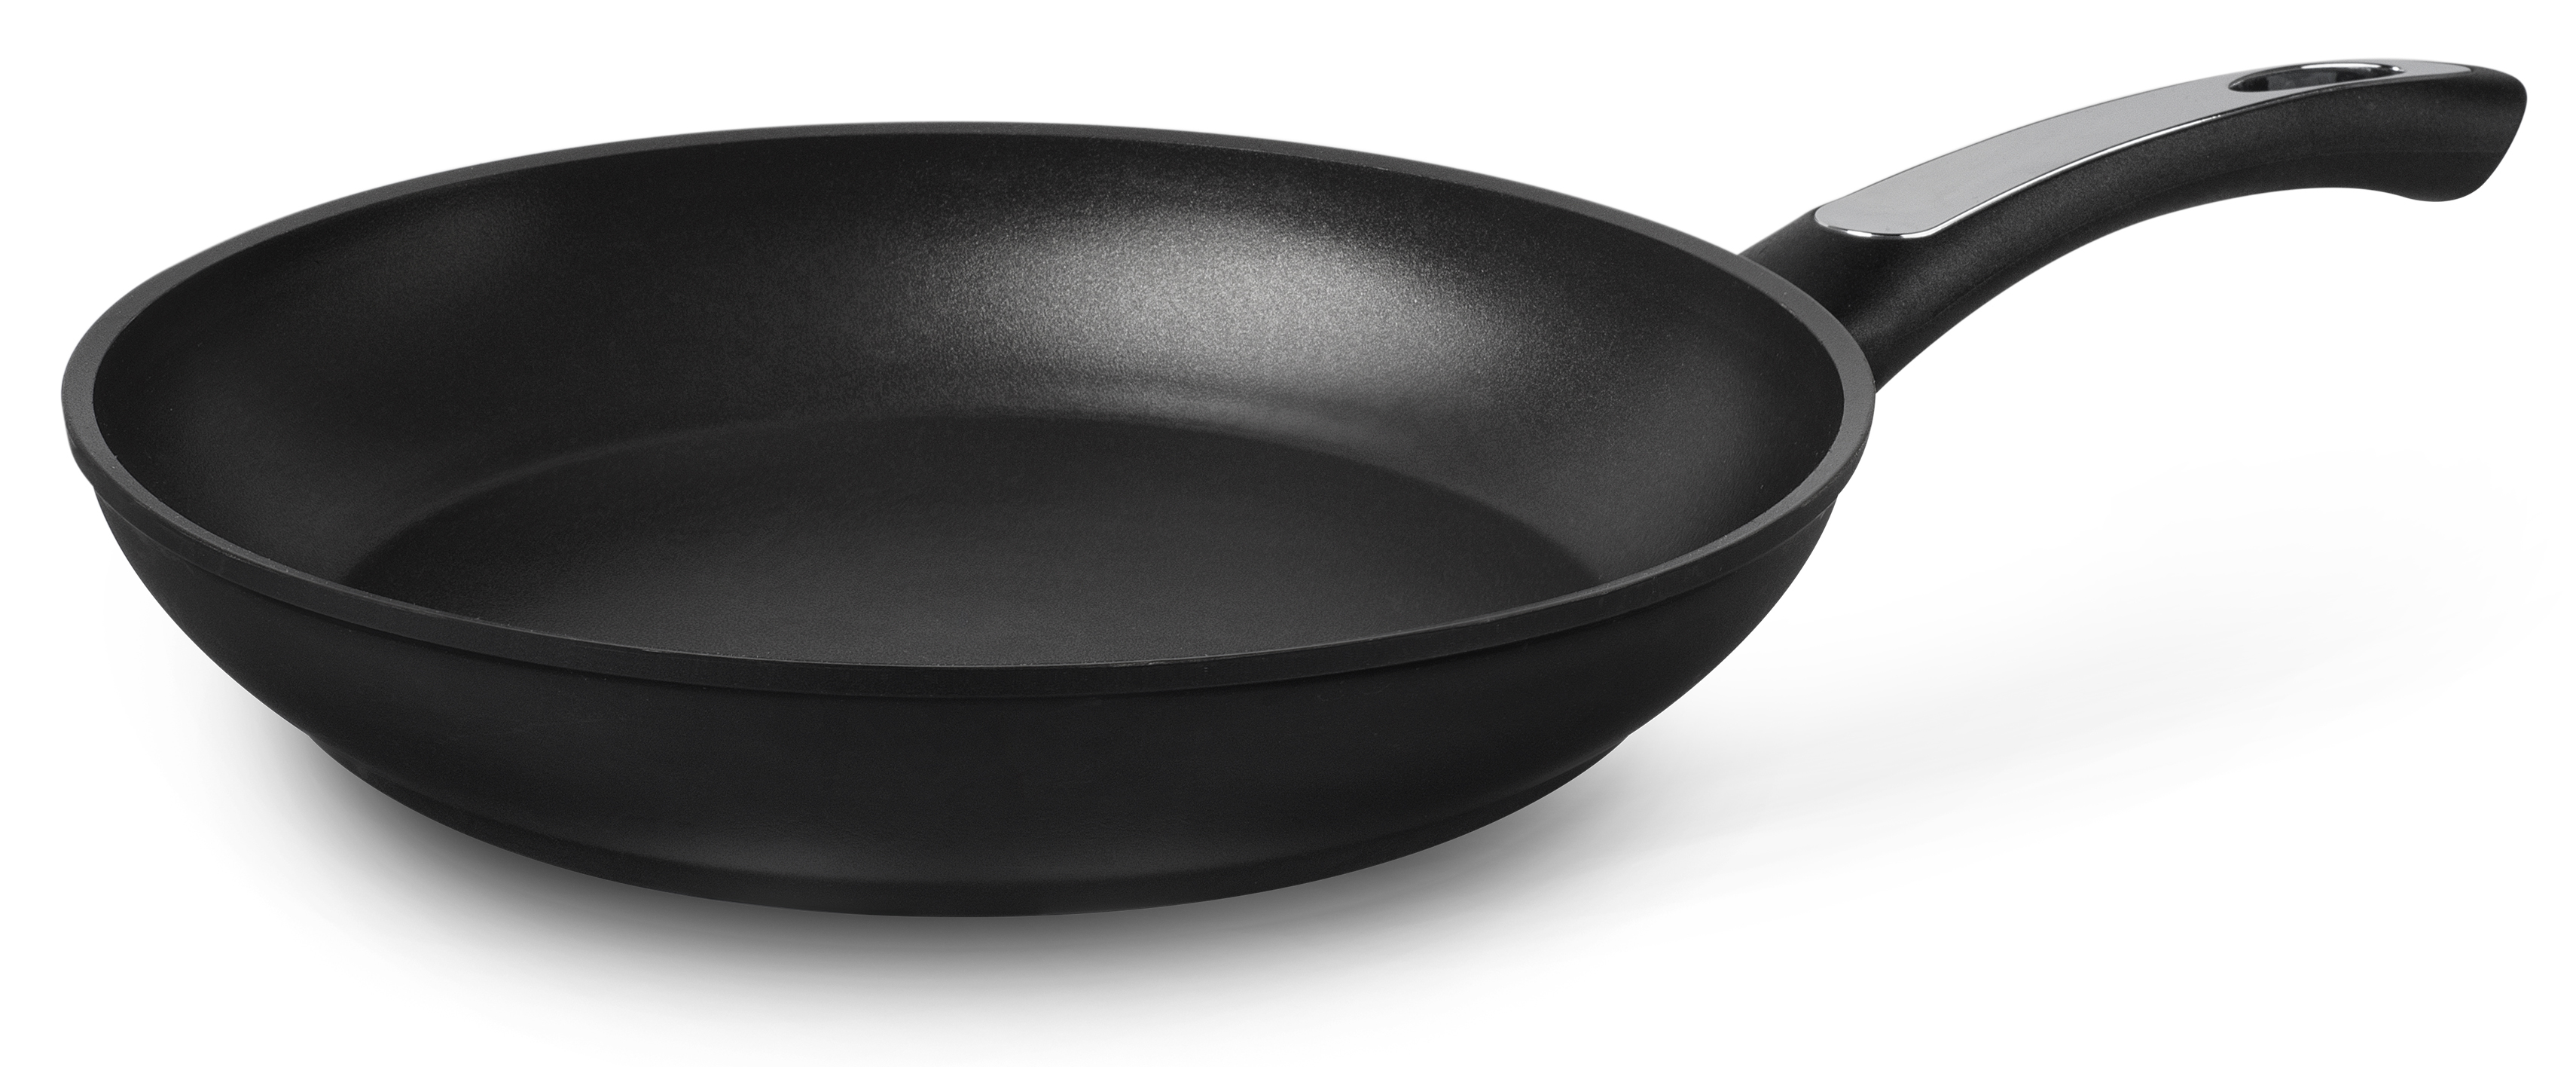 Ozeri Launches New Series of Italian-Made Frying Pans